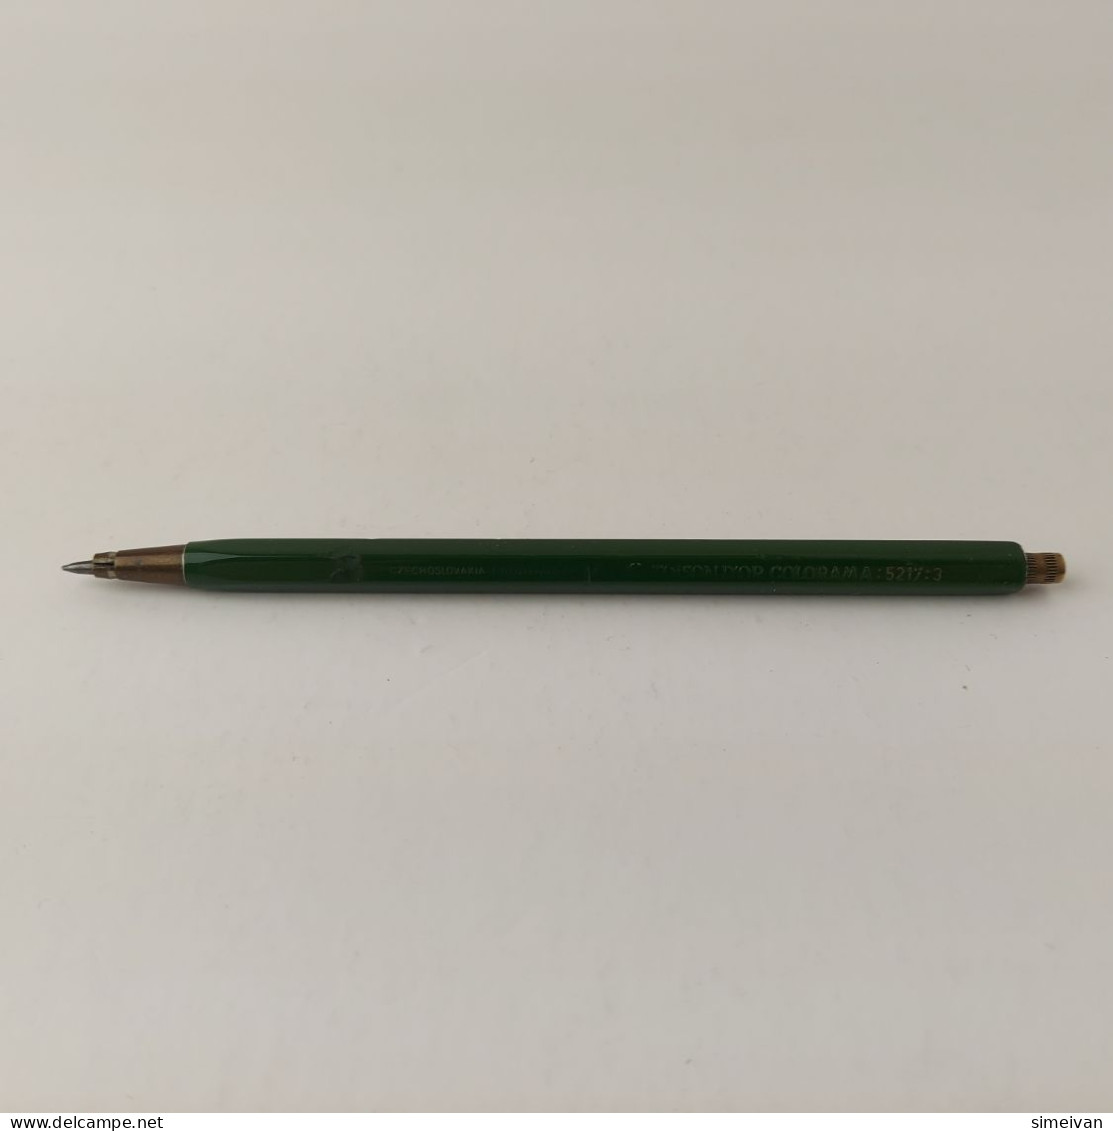 Vintage Mechanical Pencil TOISON D'OR COLORAMA 5217:3 Bohemia Works Green #5492 - Piume